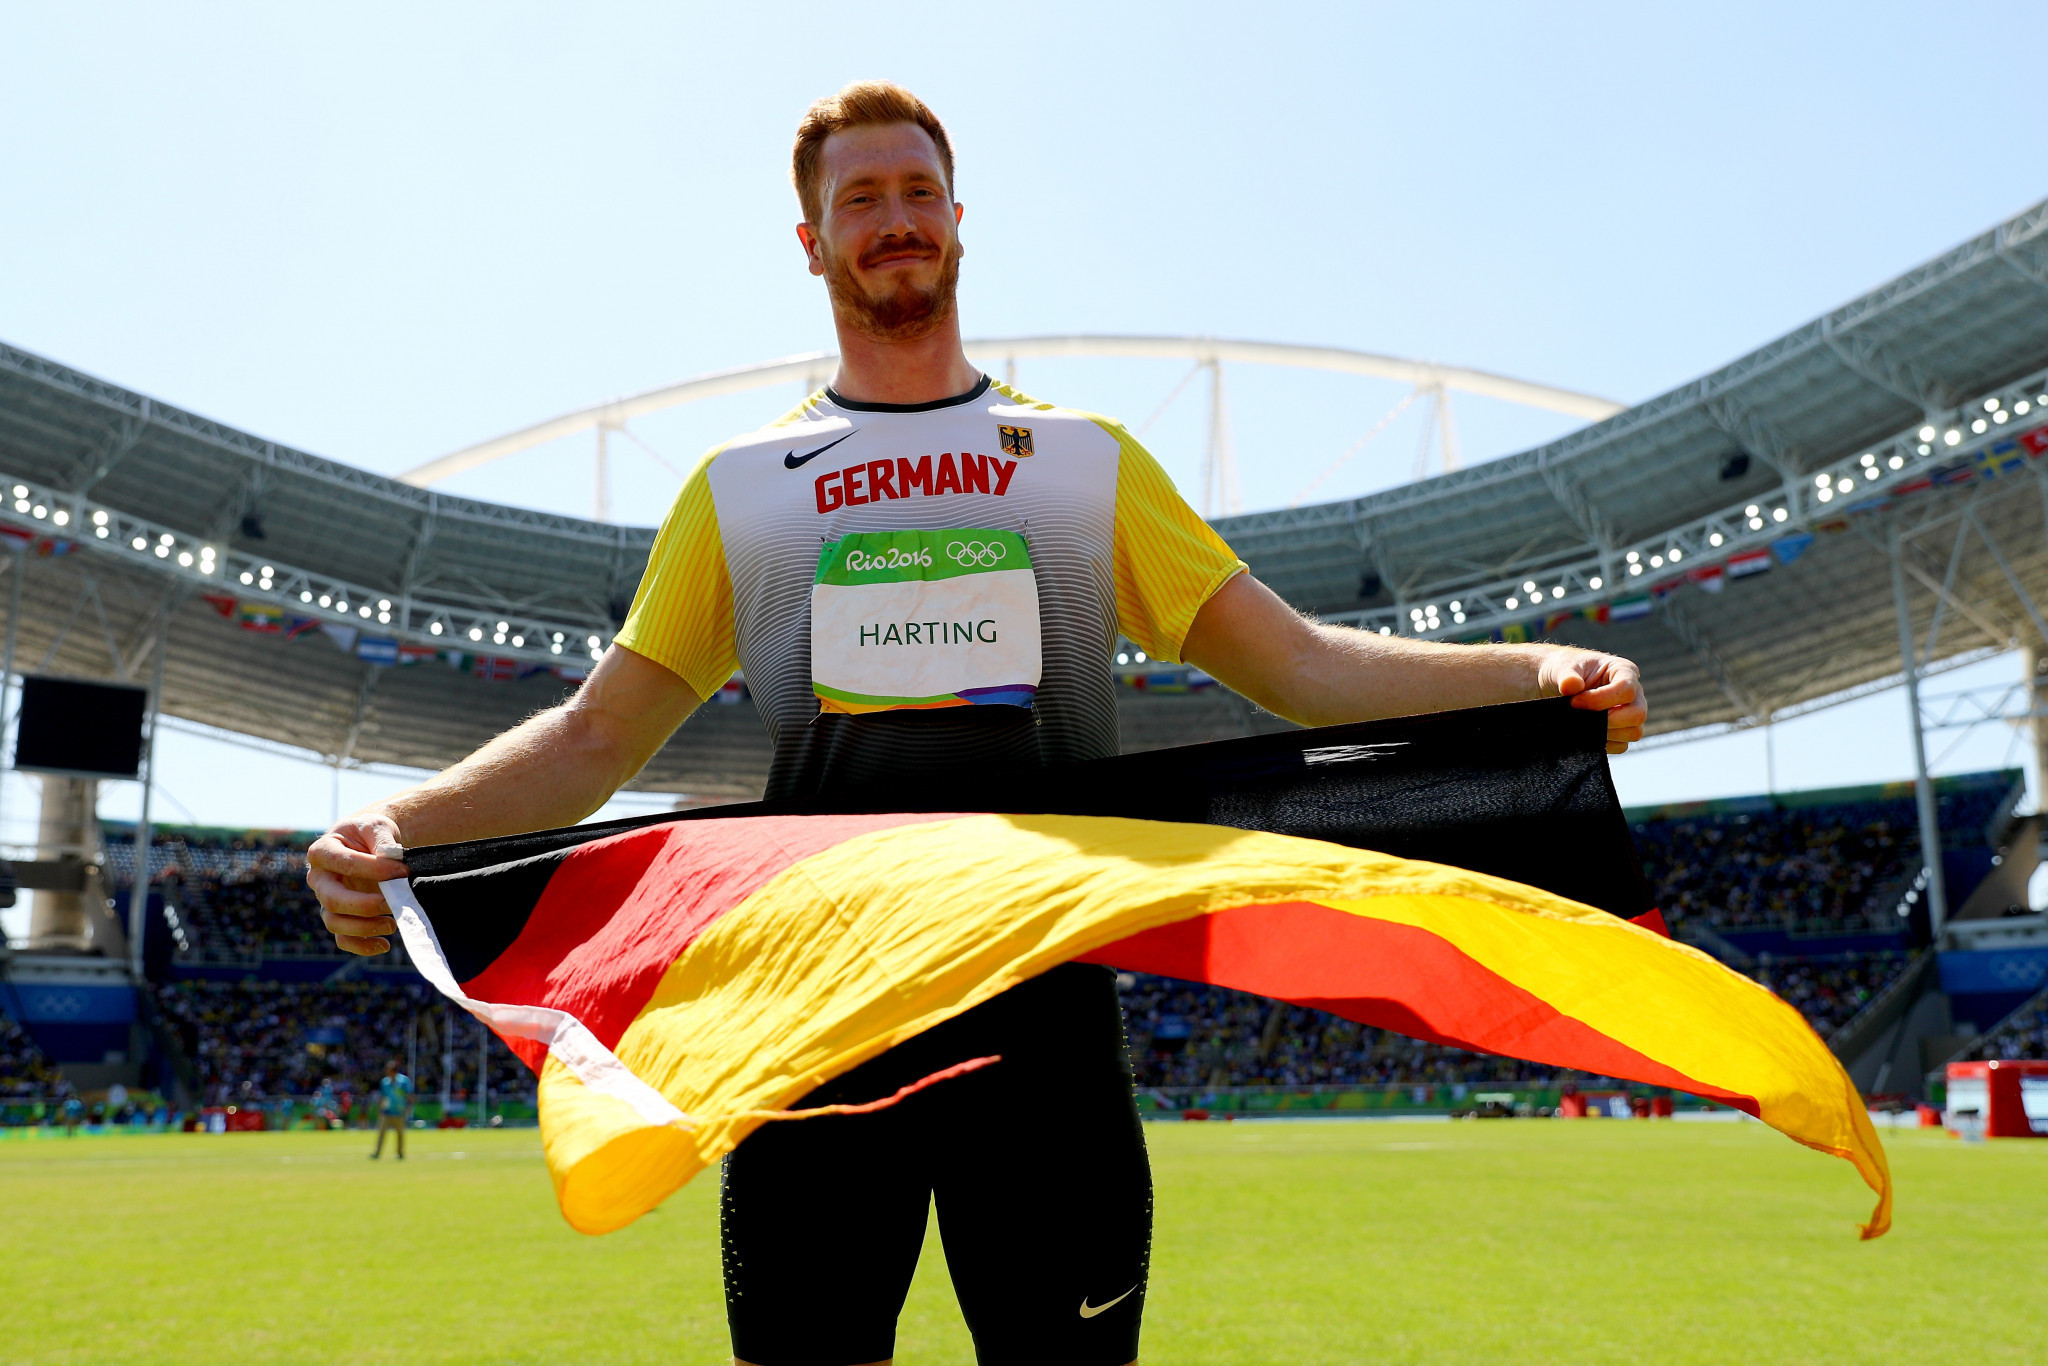 Germany's 2016 Olympic discus gold medallist Christoph Harting has criticised the IOC and Thomas Bach for the latest recommendations on Russia and Belarus ©Getty Images